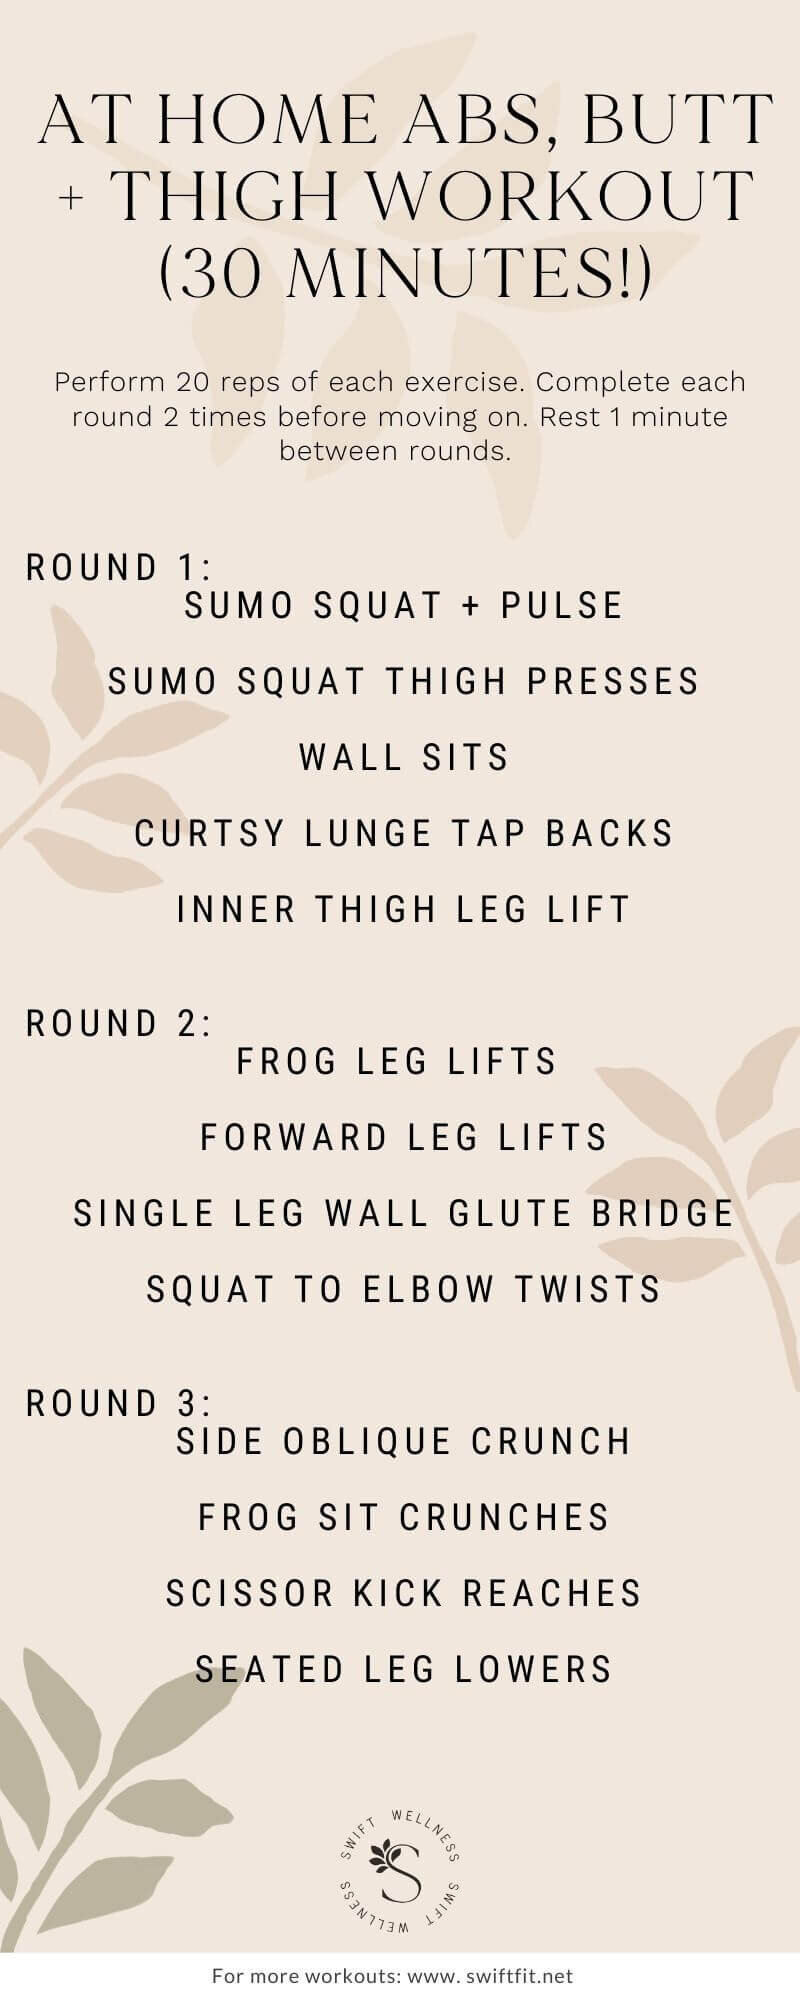 The Ultimate 30 Minute Legs and Abs Workout | Swift Wellness